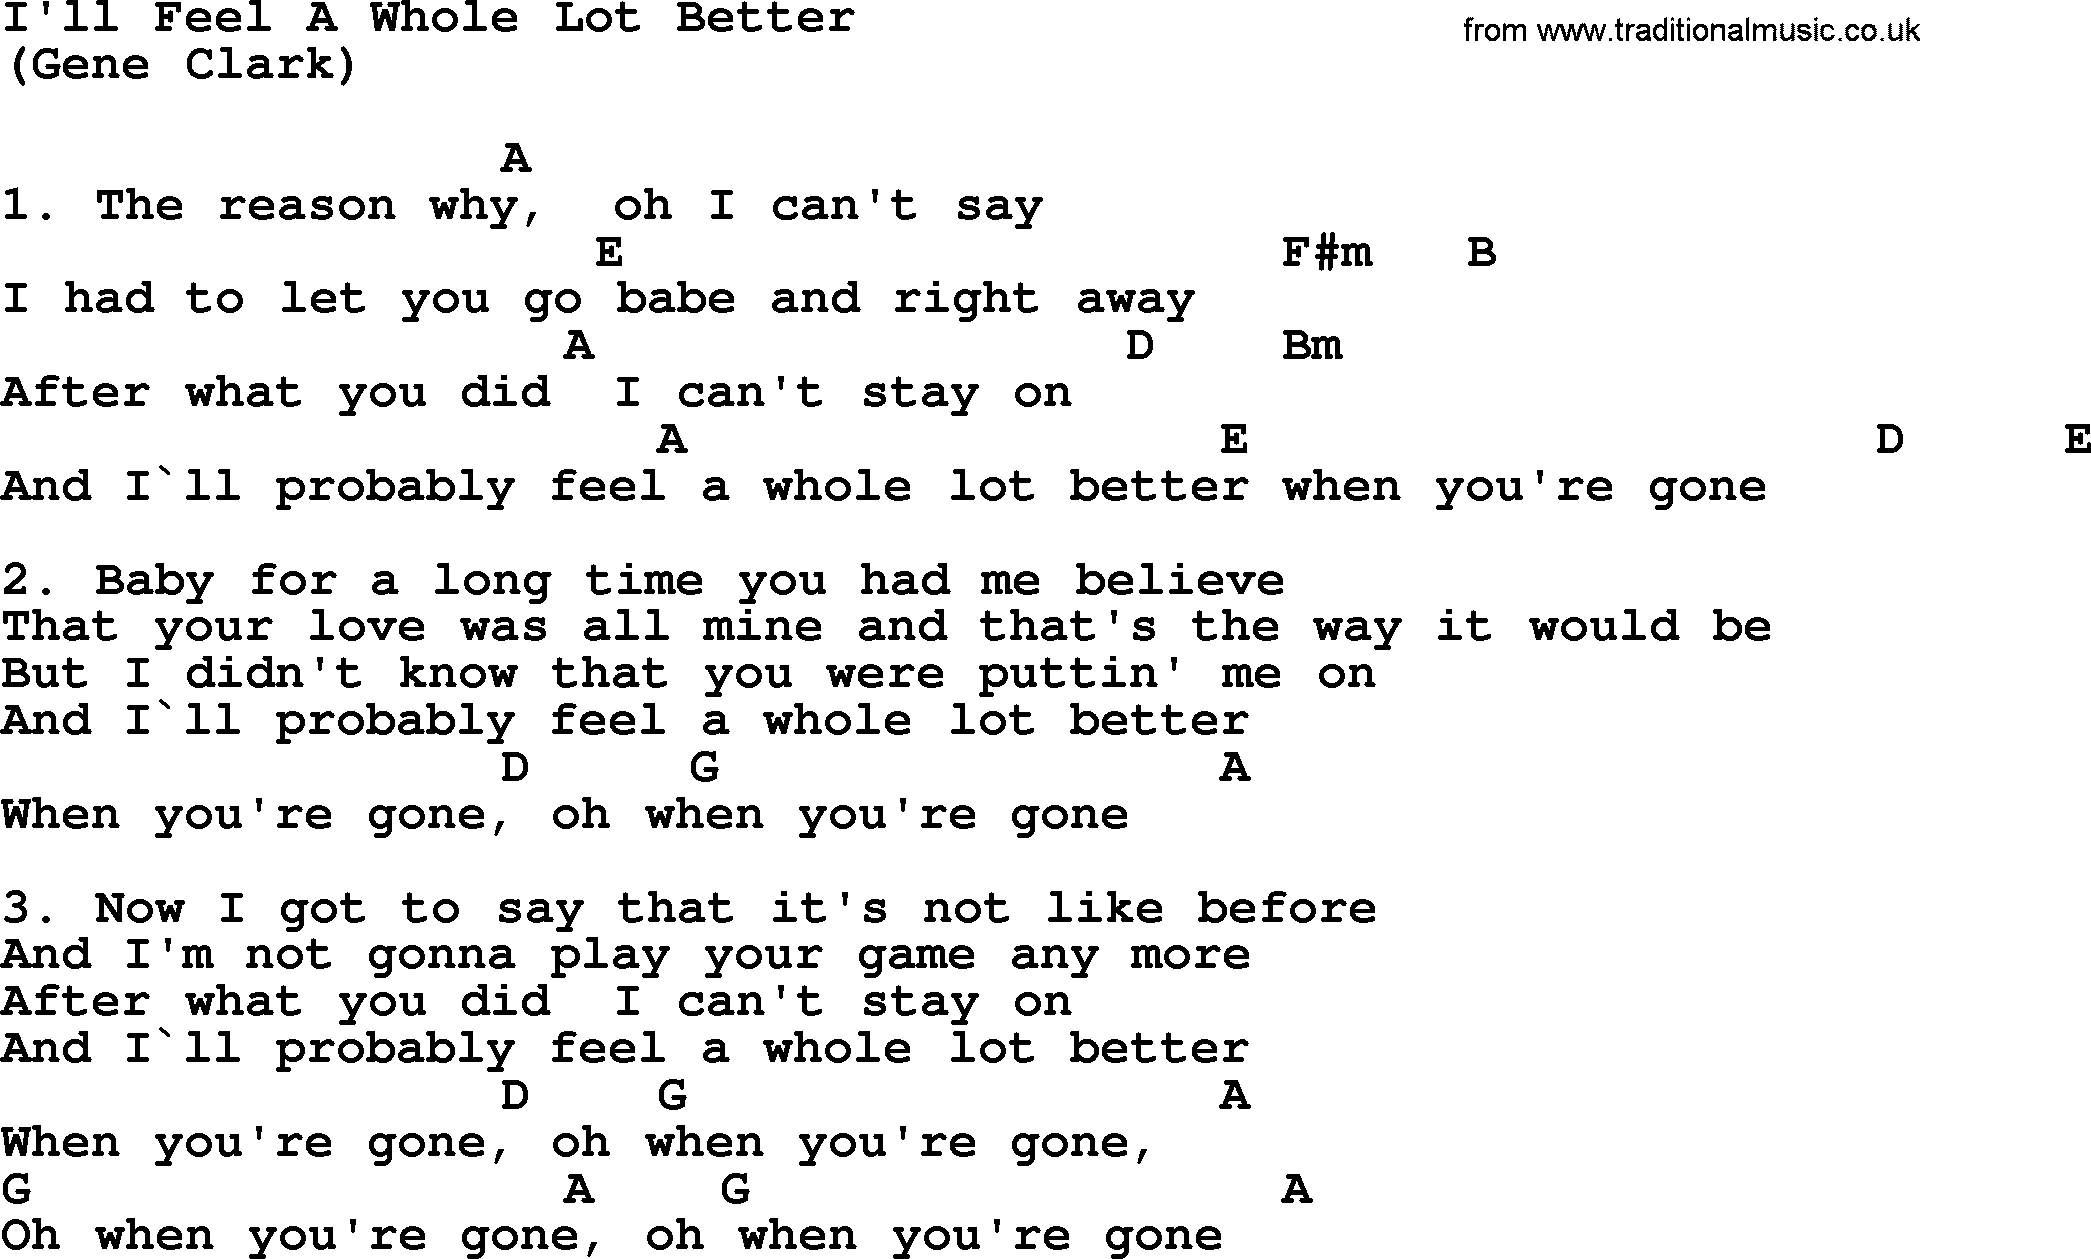 I'll Feel A Whole Lot Better, by The Byrds - lyrics and chords